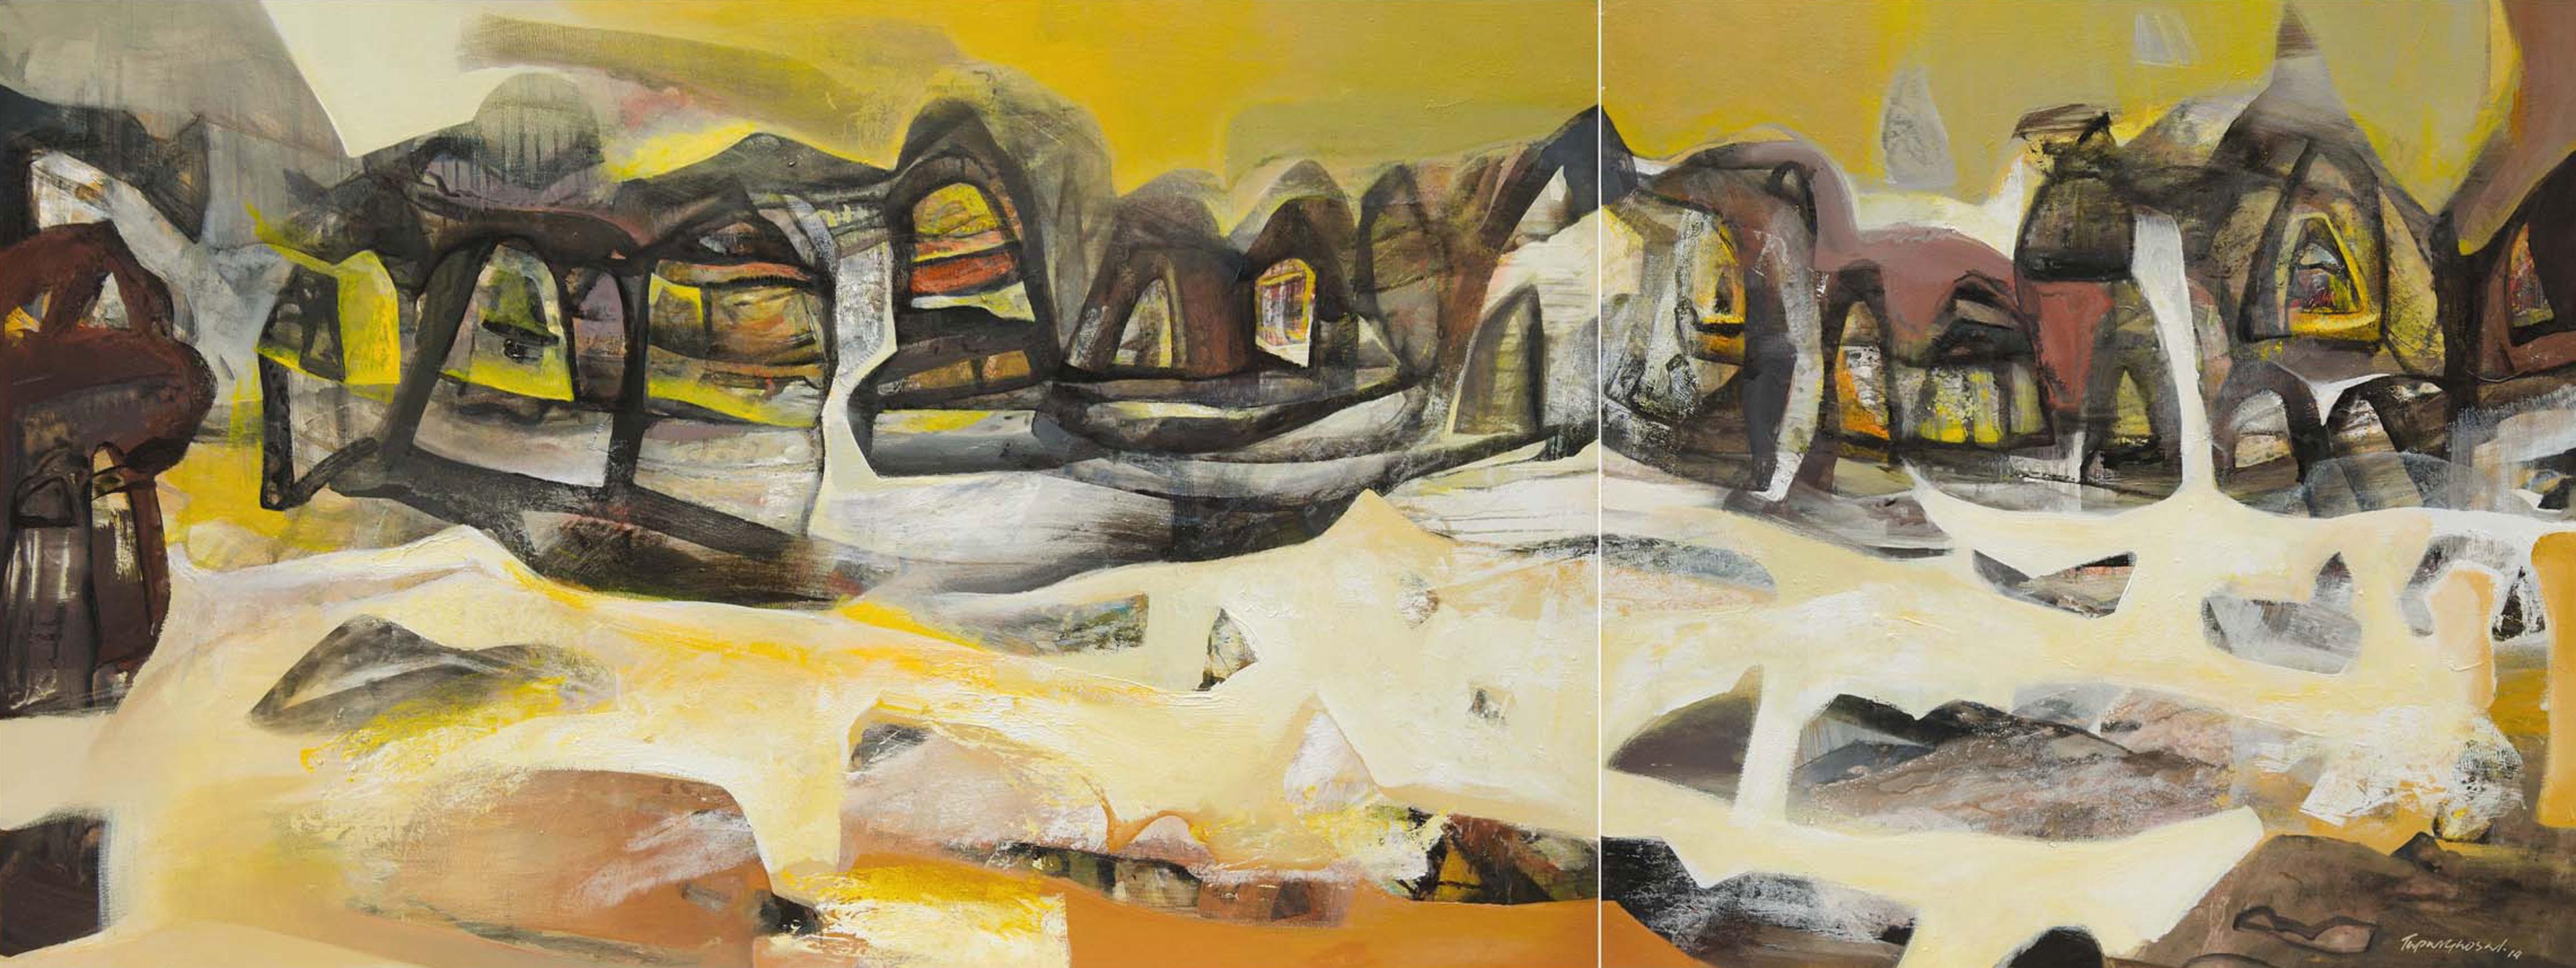 Tapas Ghosal Landscape Painting - Beneras, Diptych, Abstract, Acrylic on canvas, Yellow, Brown, White "In Stock"